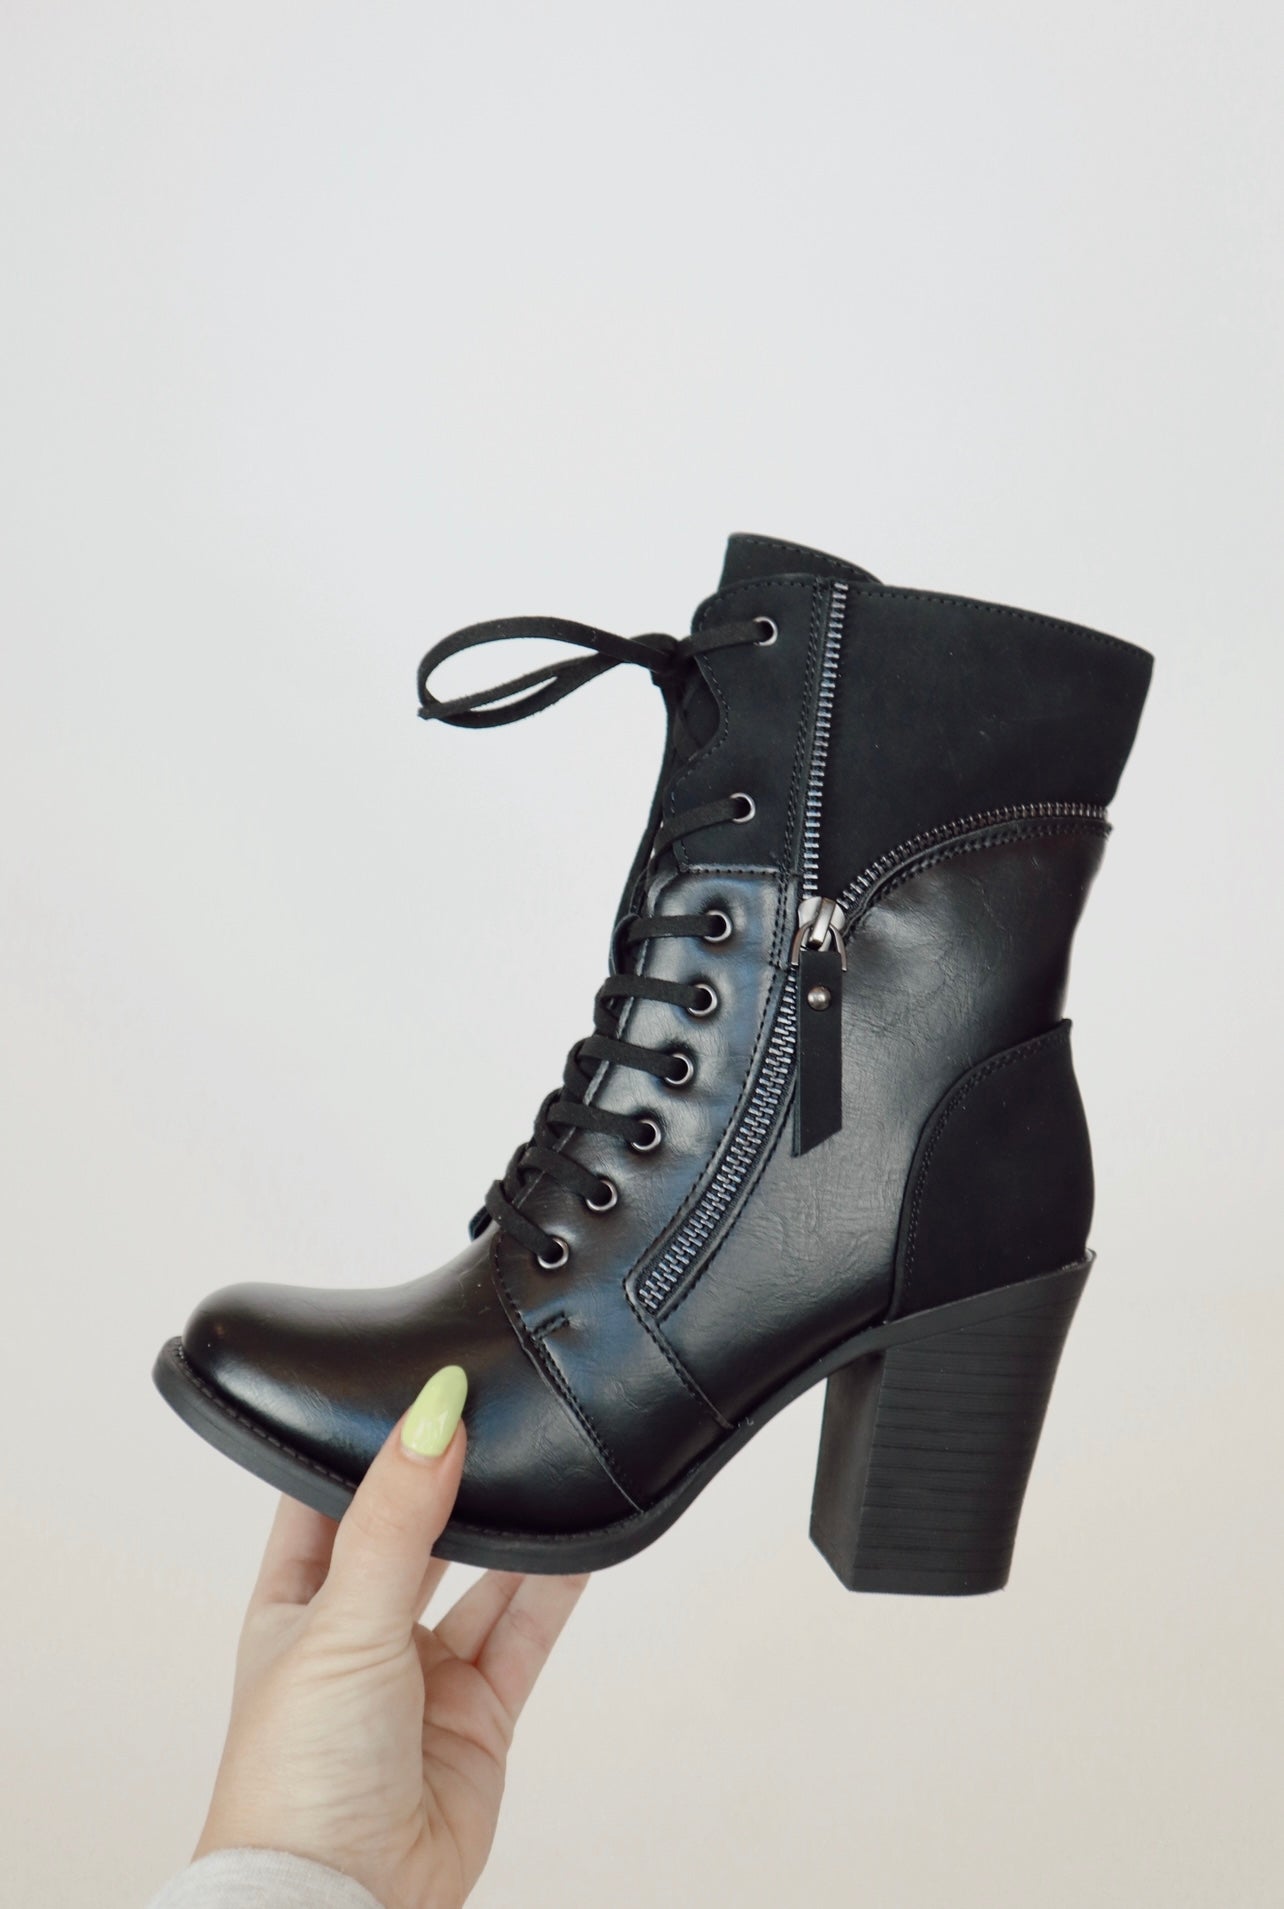 black lace up booties